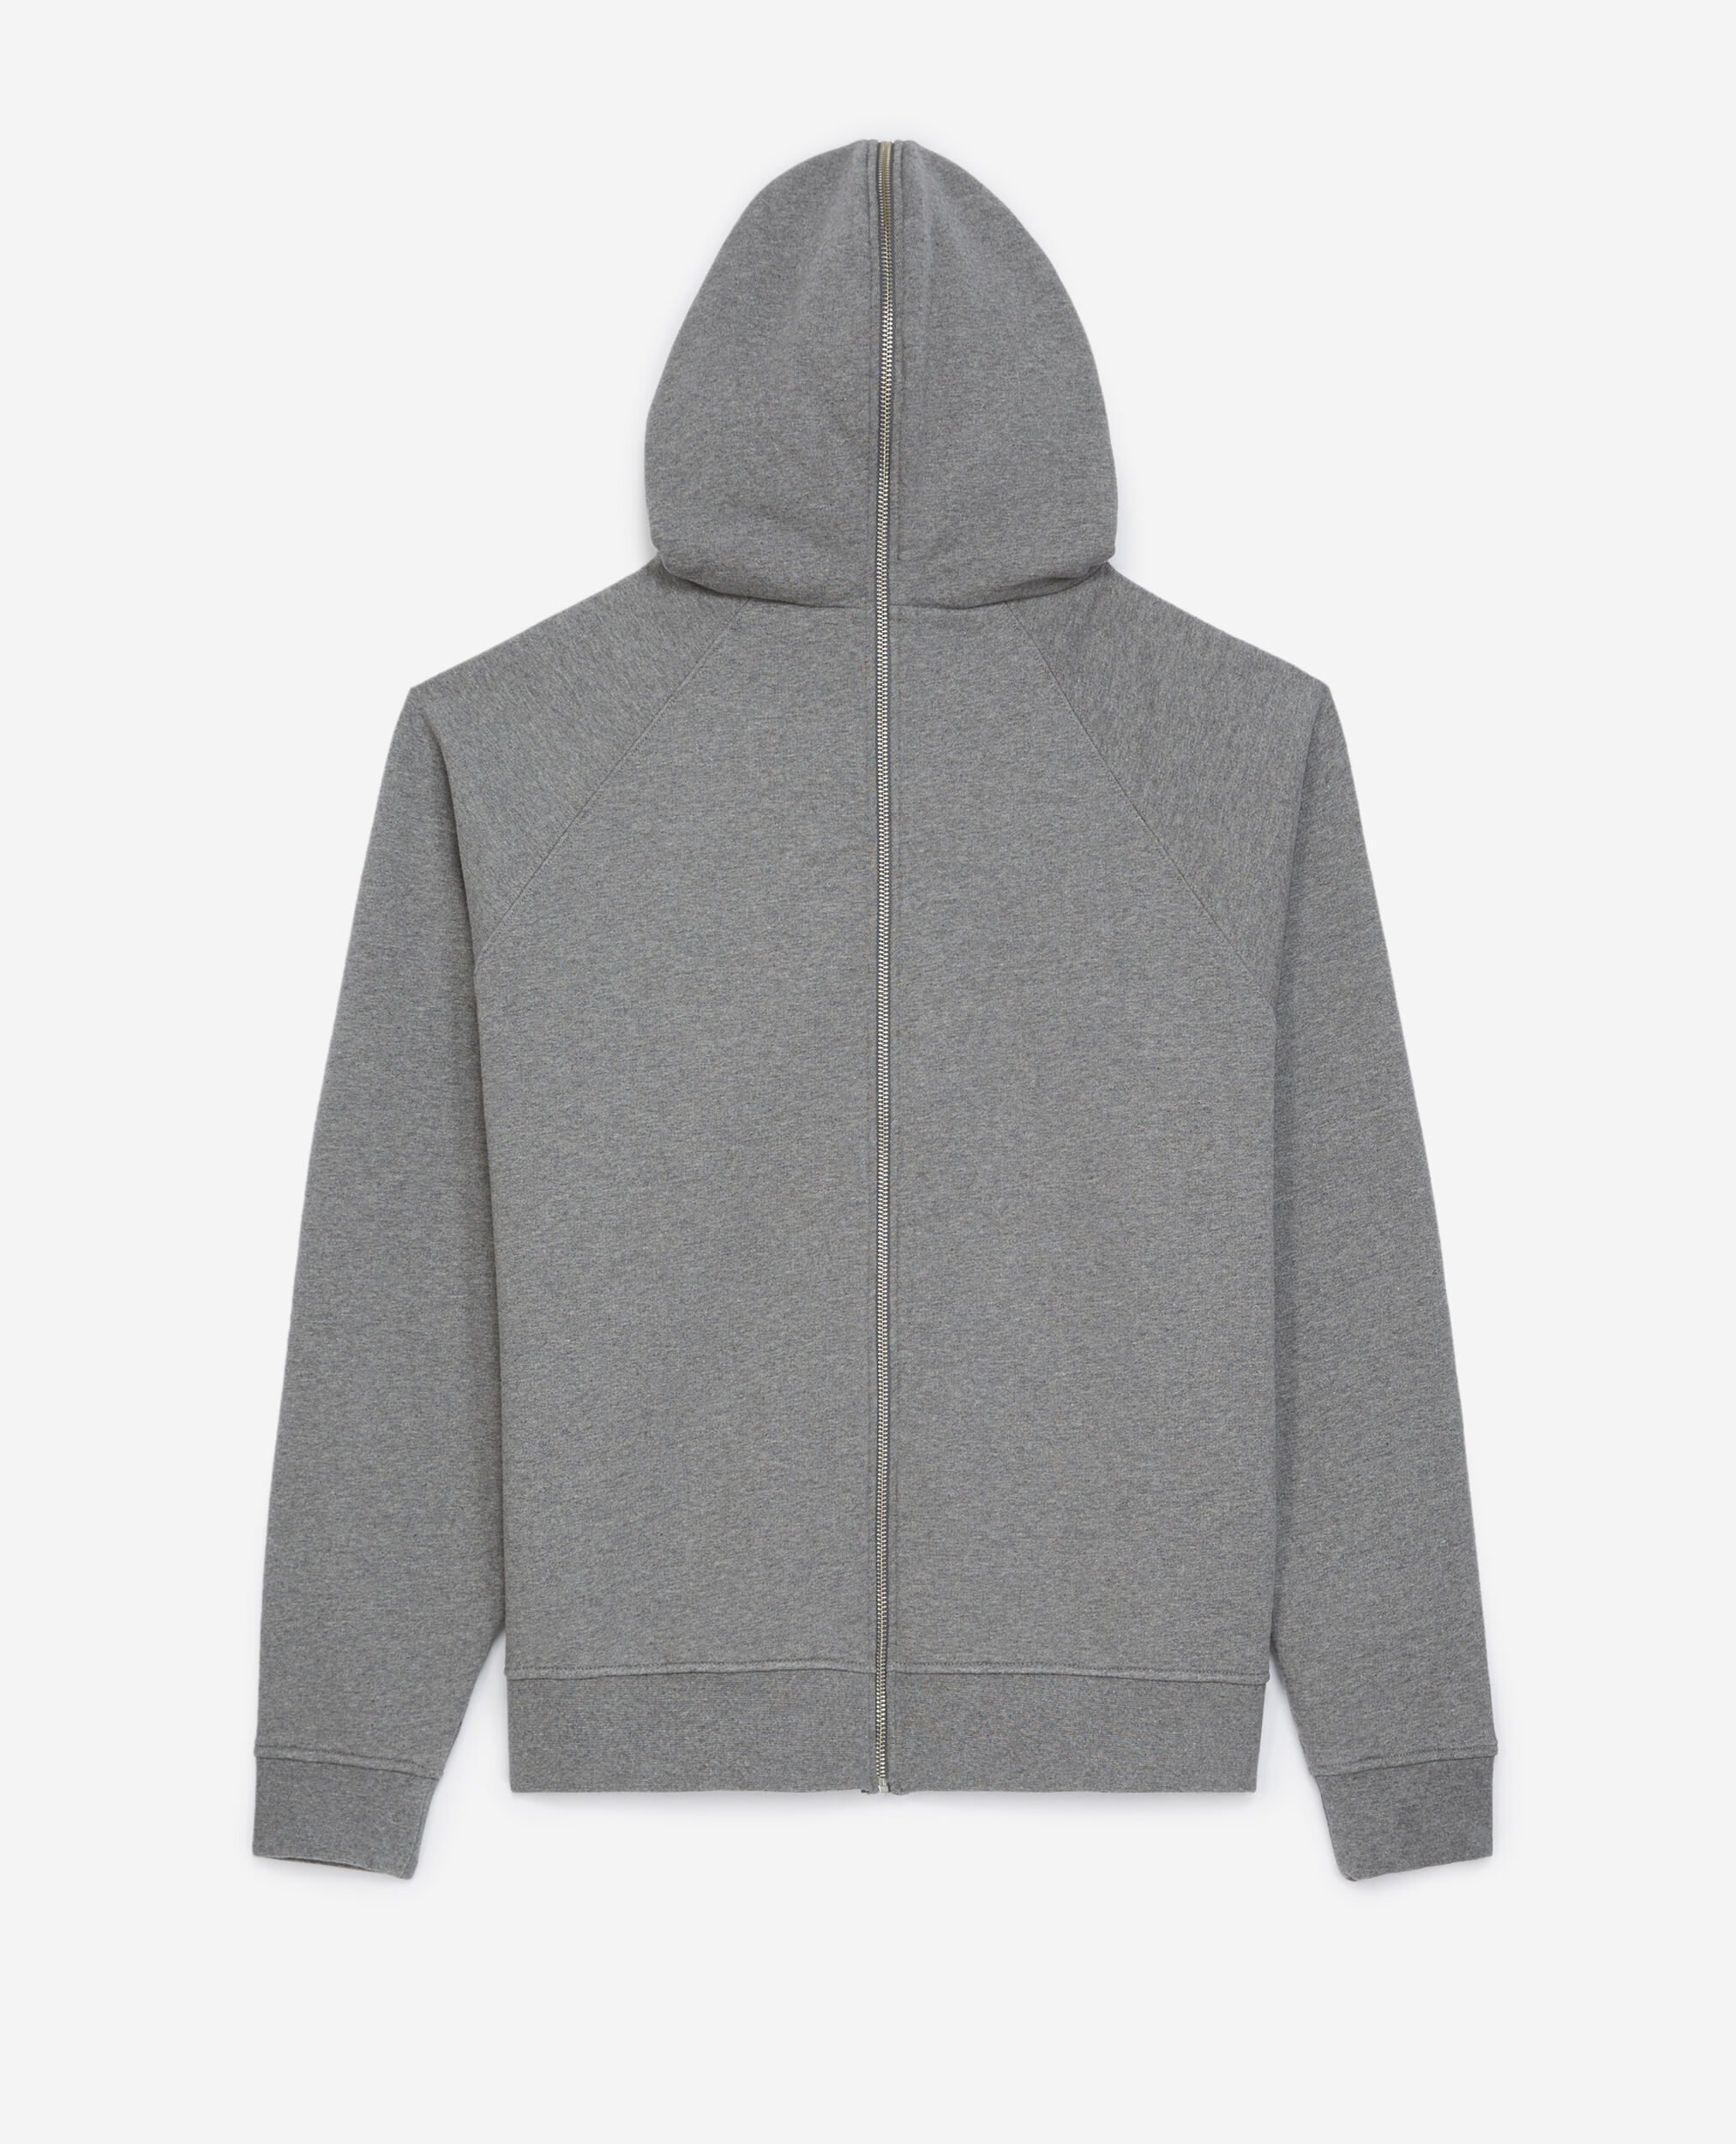 Flecked gray hoodie in cotton with logo, GREY MELANGE, hi-res image number null